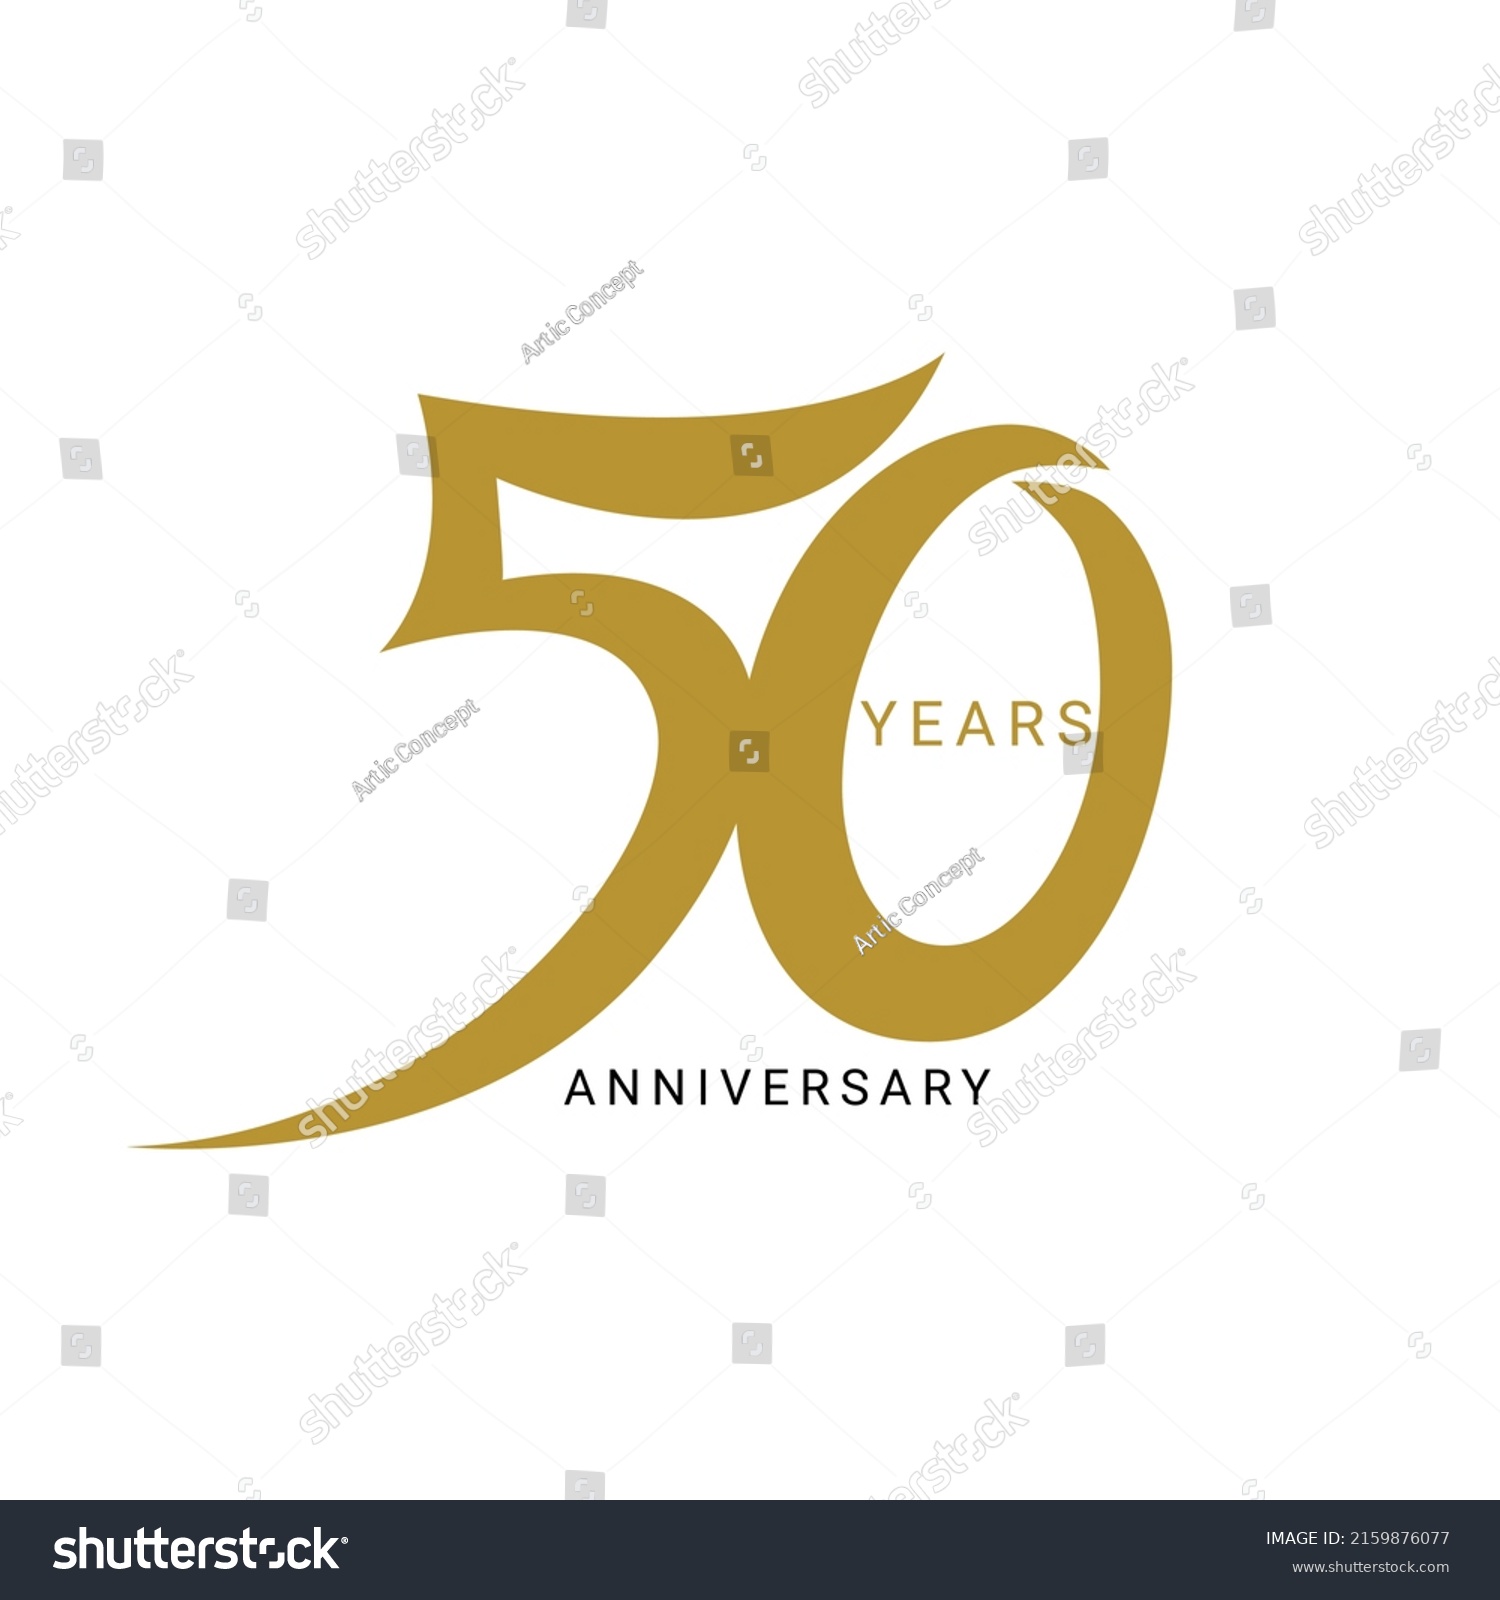 50 Year Anniversary Logo Golden Color Stock Vector (Royalty Free ...